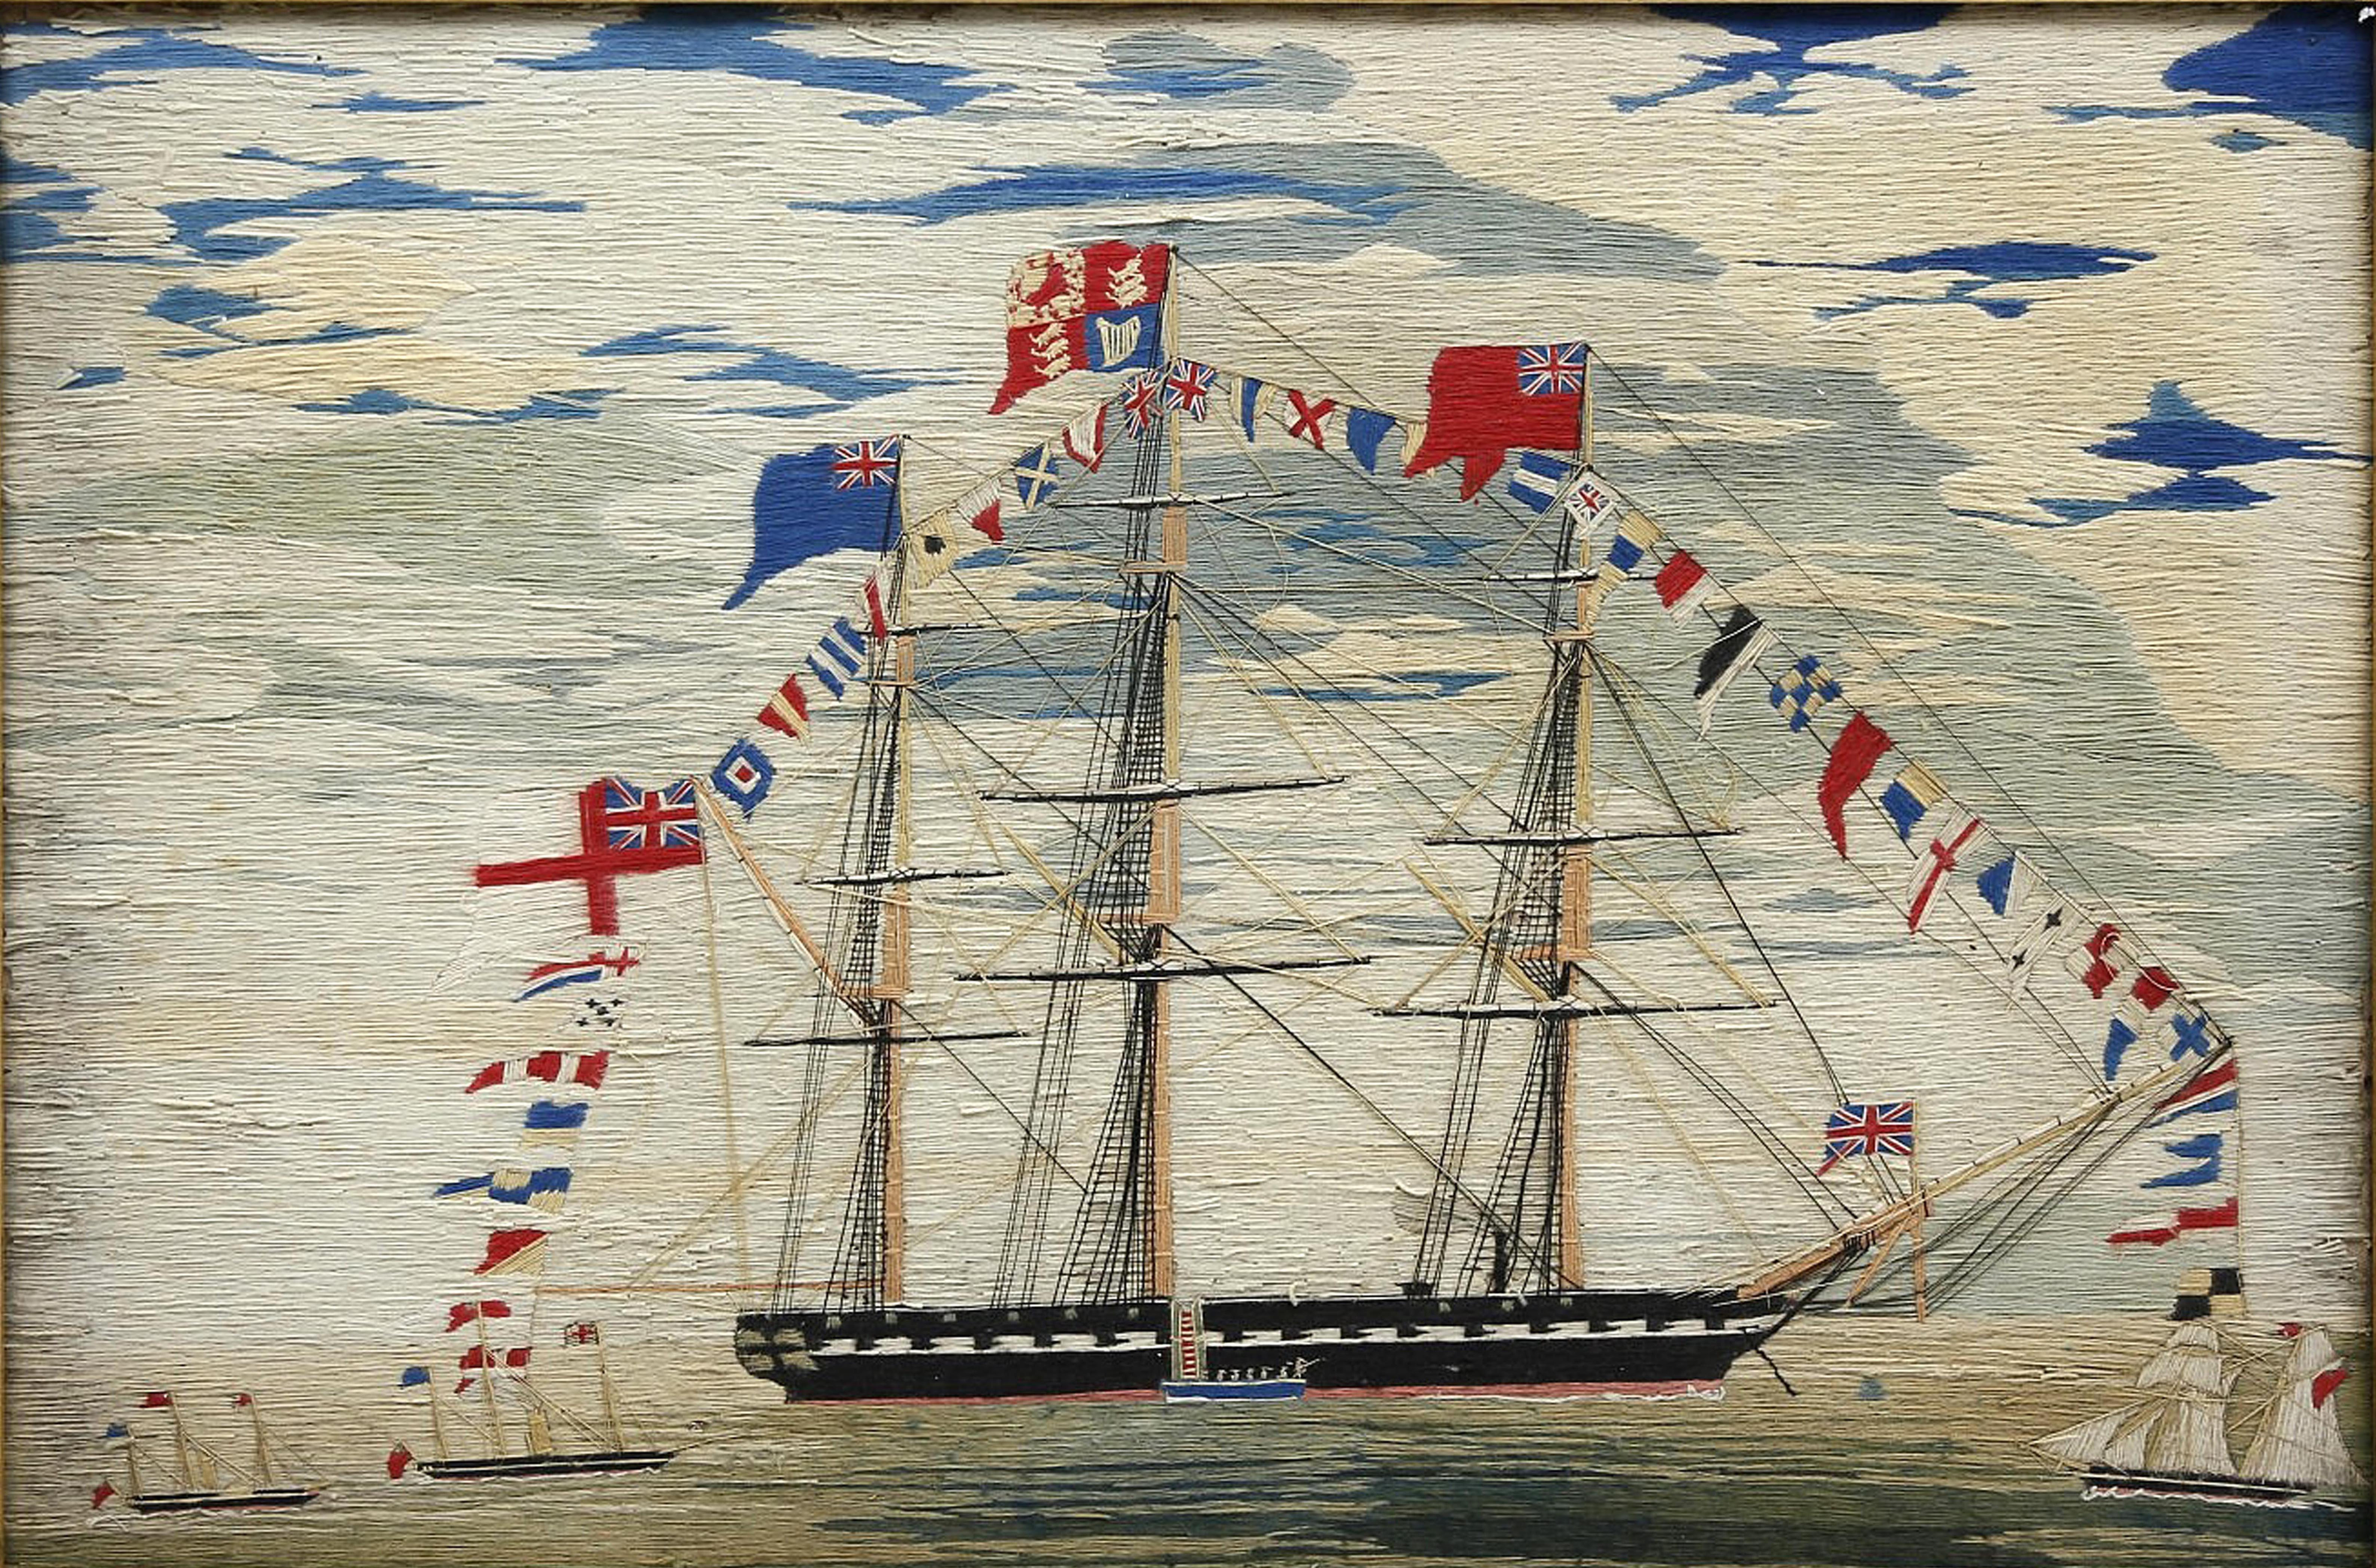 Large sailor's woolwork or woolie of a fully dressed Royal navy frigate,
circa 1865-1875. 


The sailor's woolwork is particularly large. It depicts a Royal Navy Frigate at anchor, fully dressed, and flying the Royal Standard which means that a